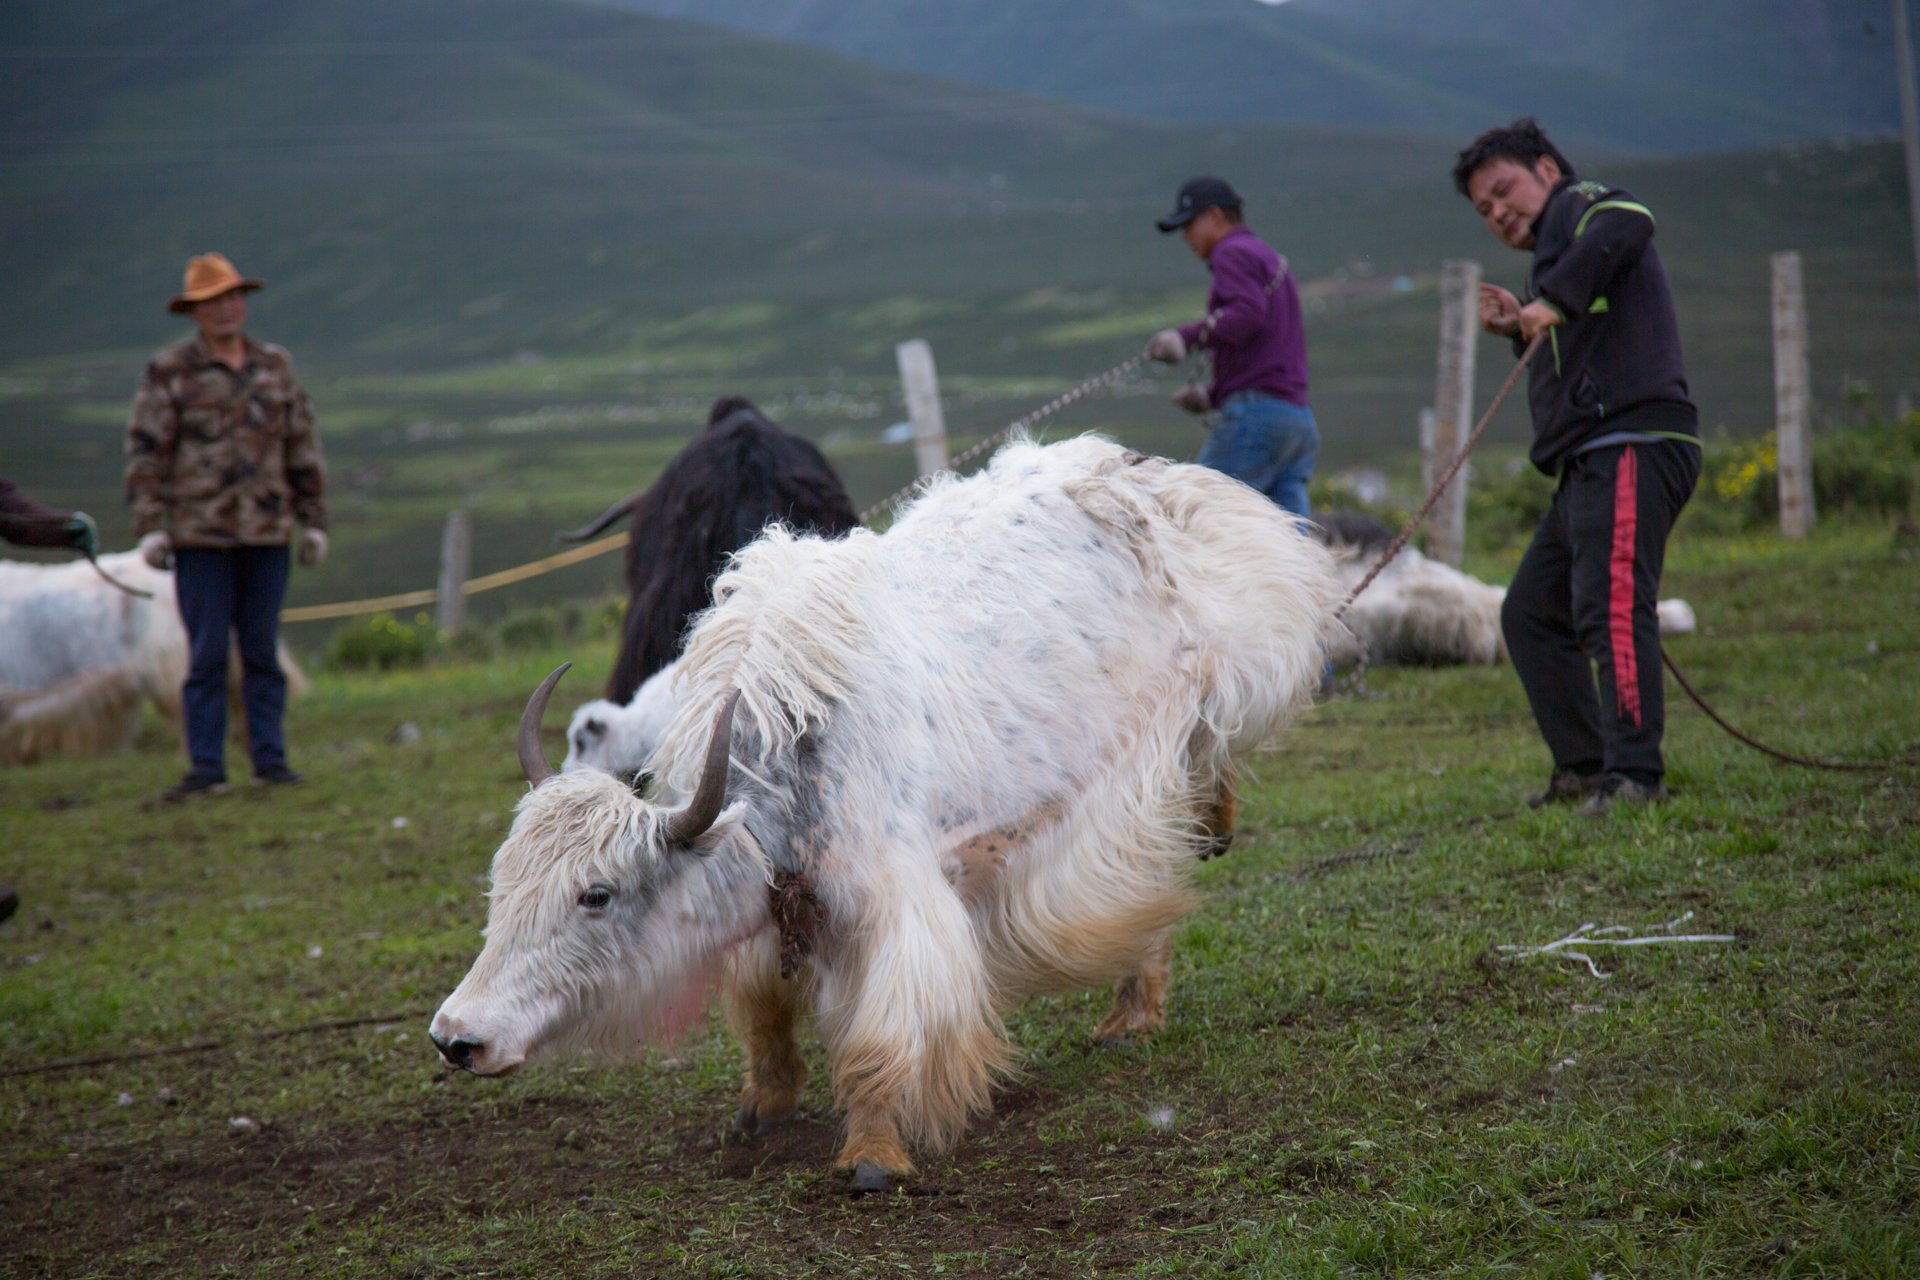  A Tibetan man fells a yak to the ground as part of the annual practice of shearing, immunising, and tagging their herds. Yaks are the keystone of Tibetan life Dechen, Gansu. July 2019 // Shot for Yakma 